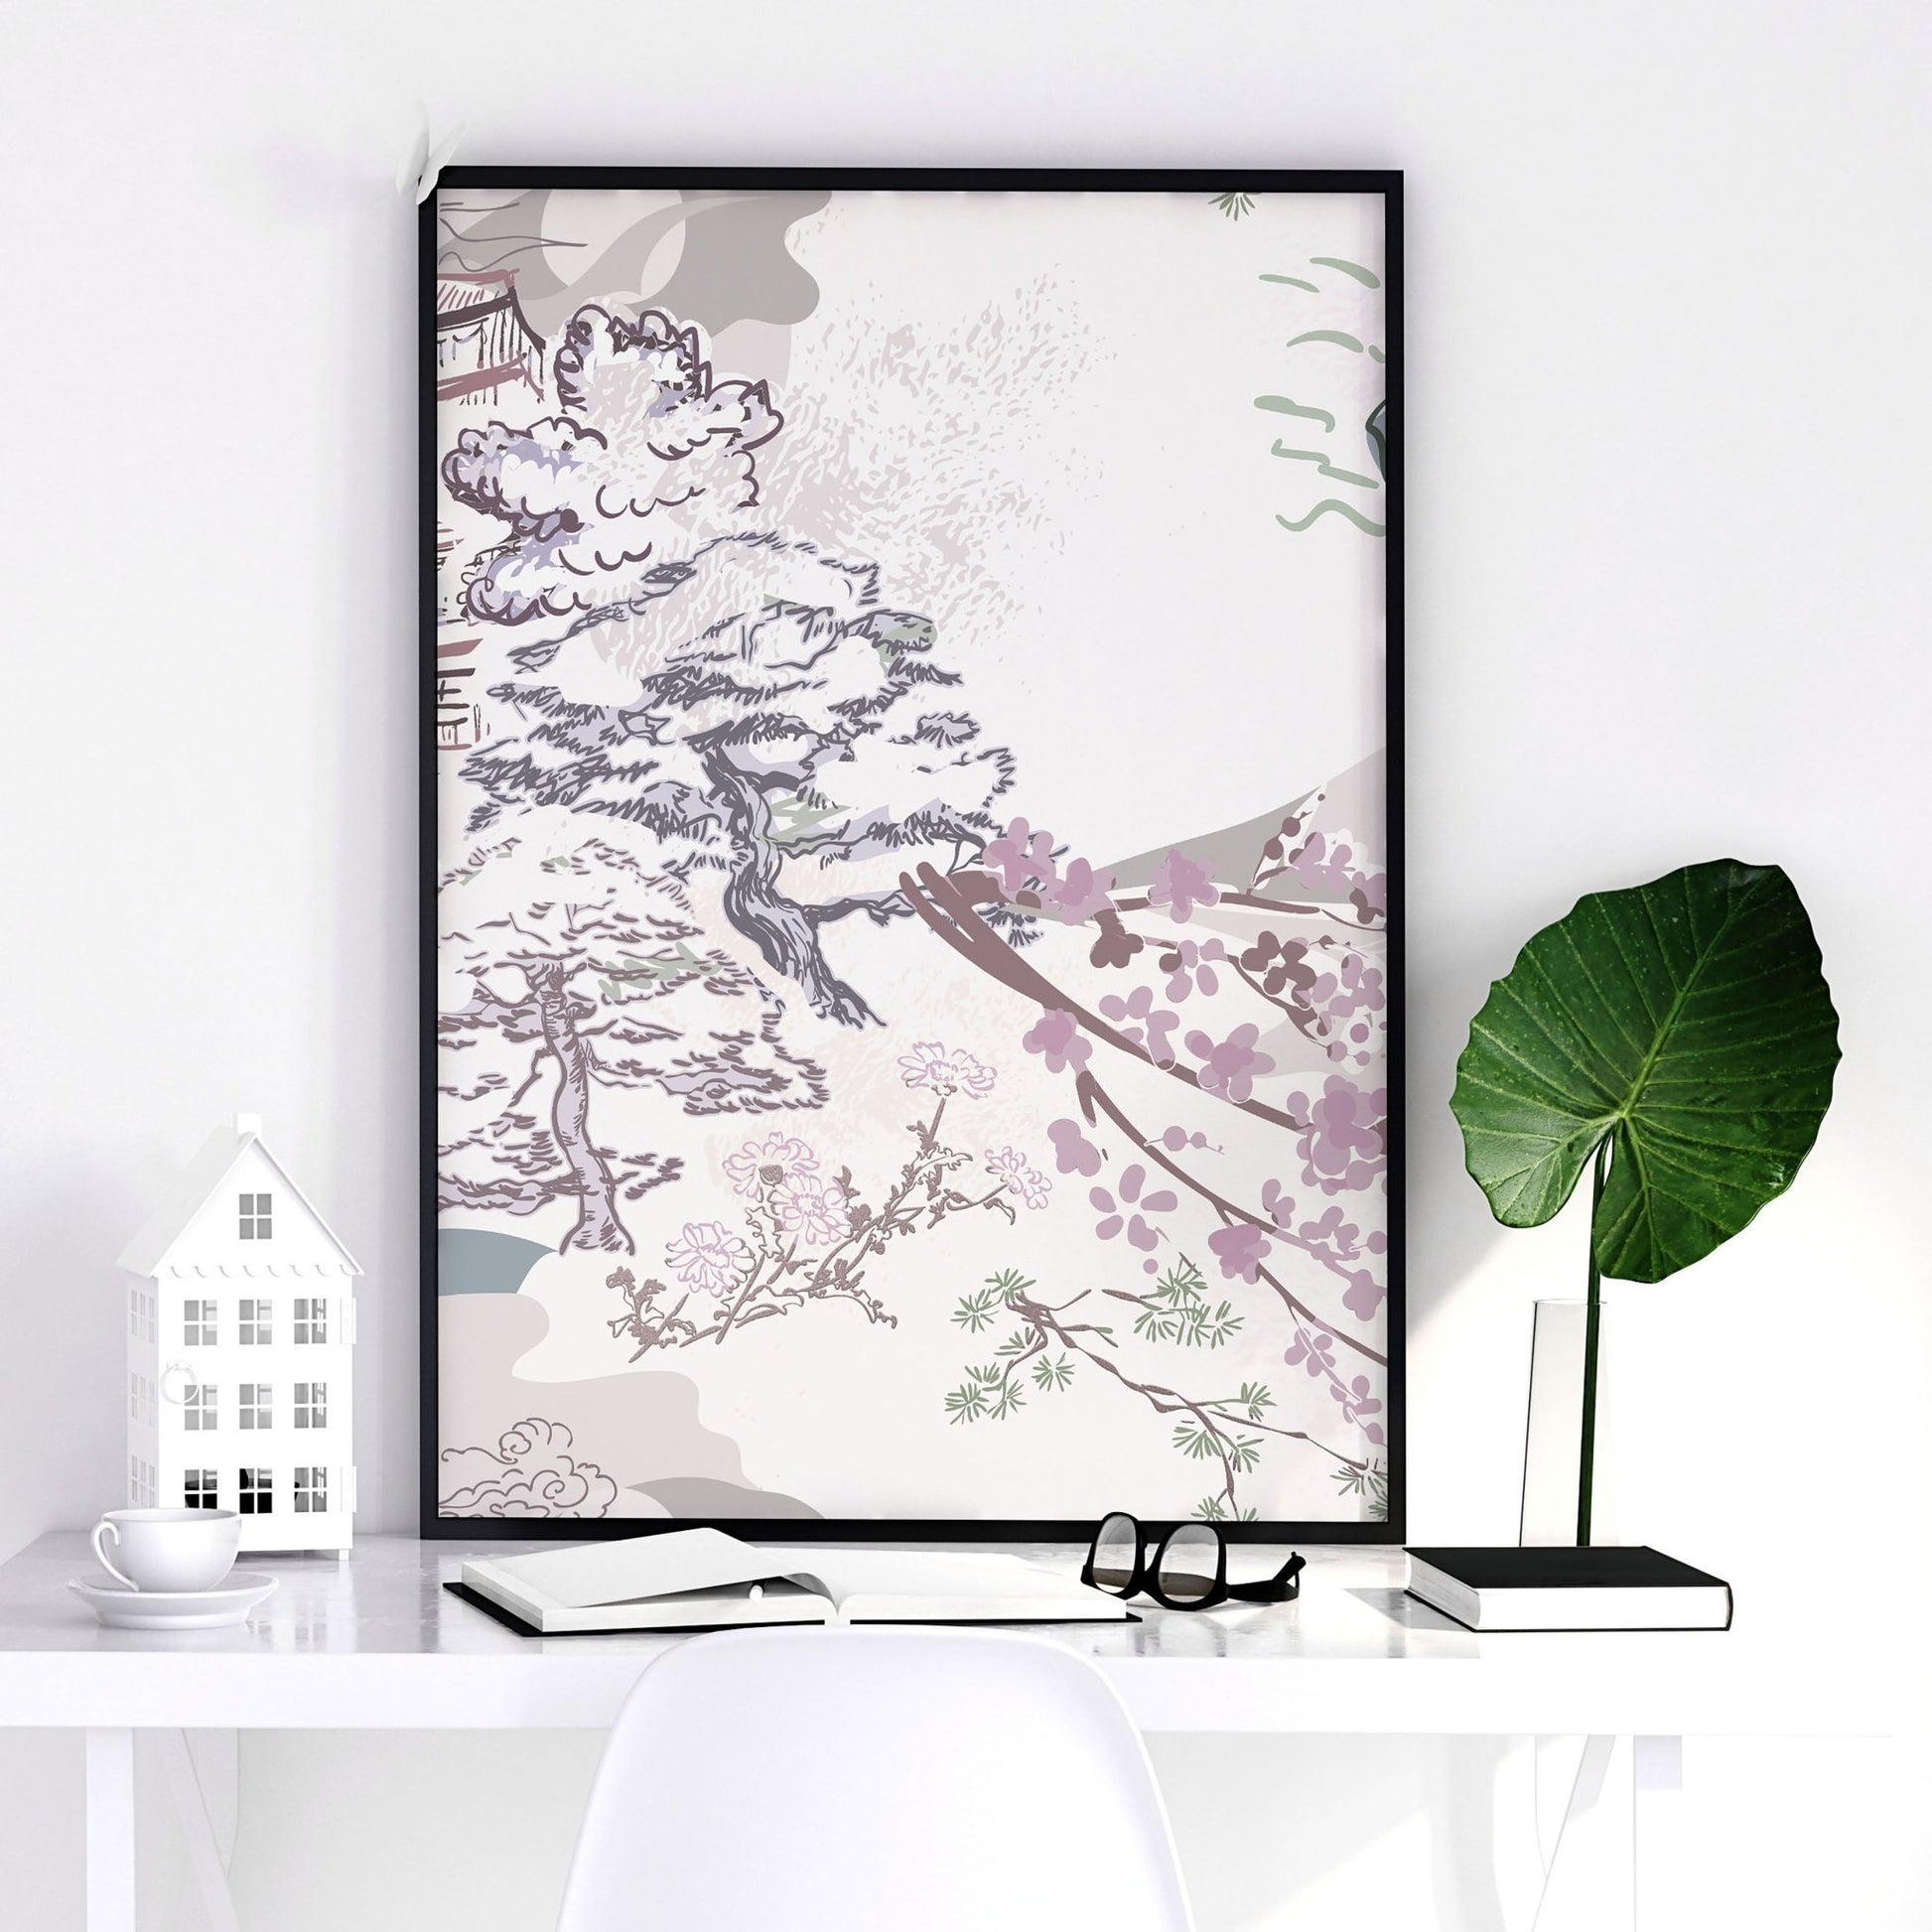 Chinoiserie wall art | set of 3 wall art prints for home office - About Wall Art